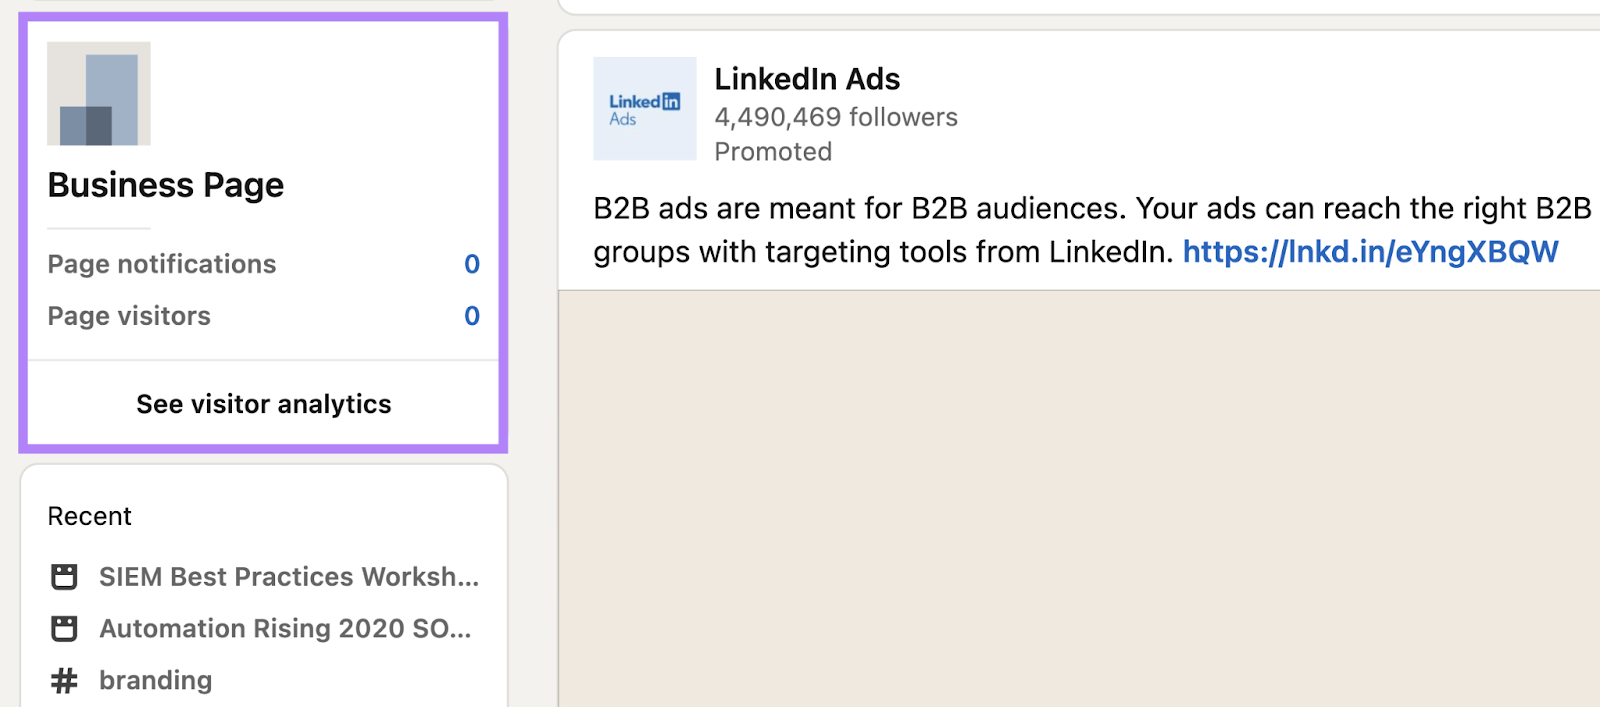 "Business Page" section highlighted on the left side of LinkedIn homepage